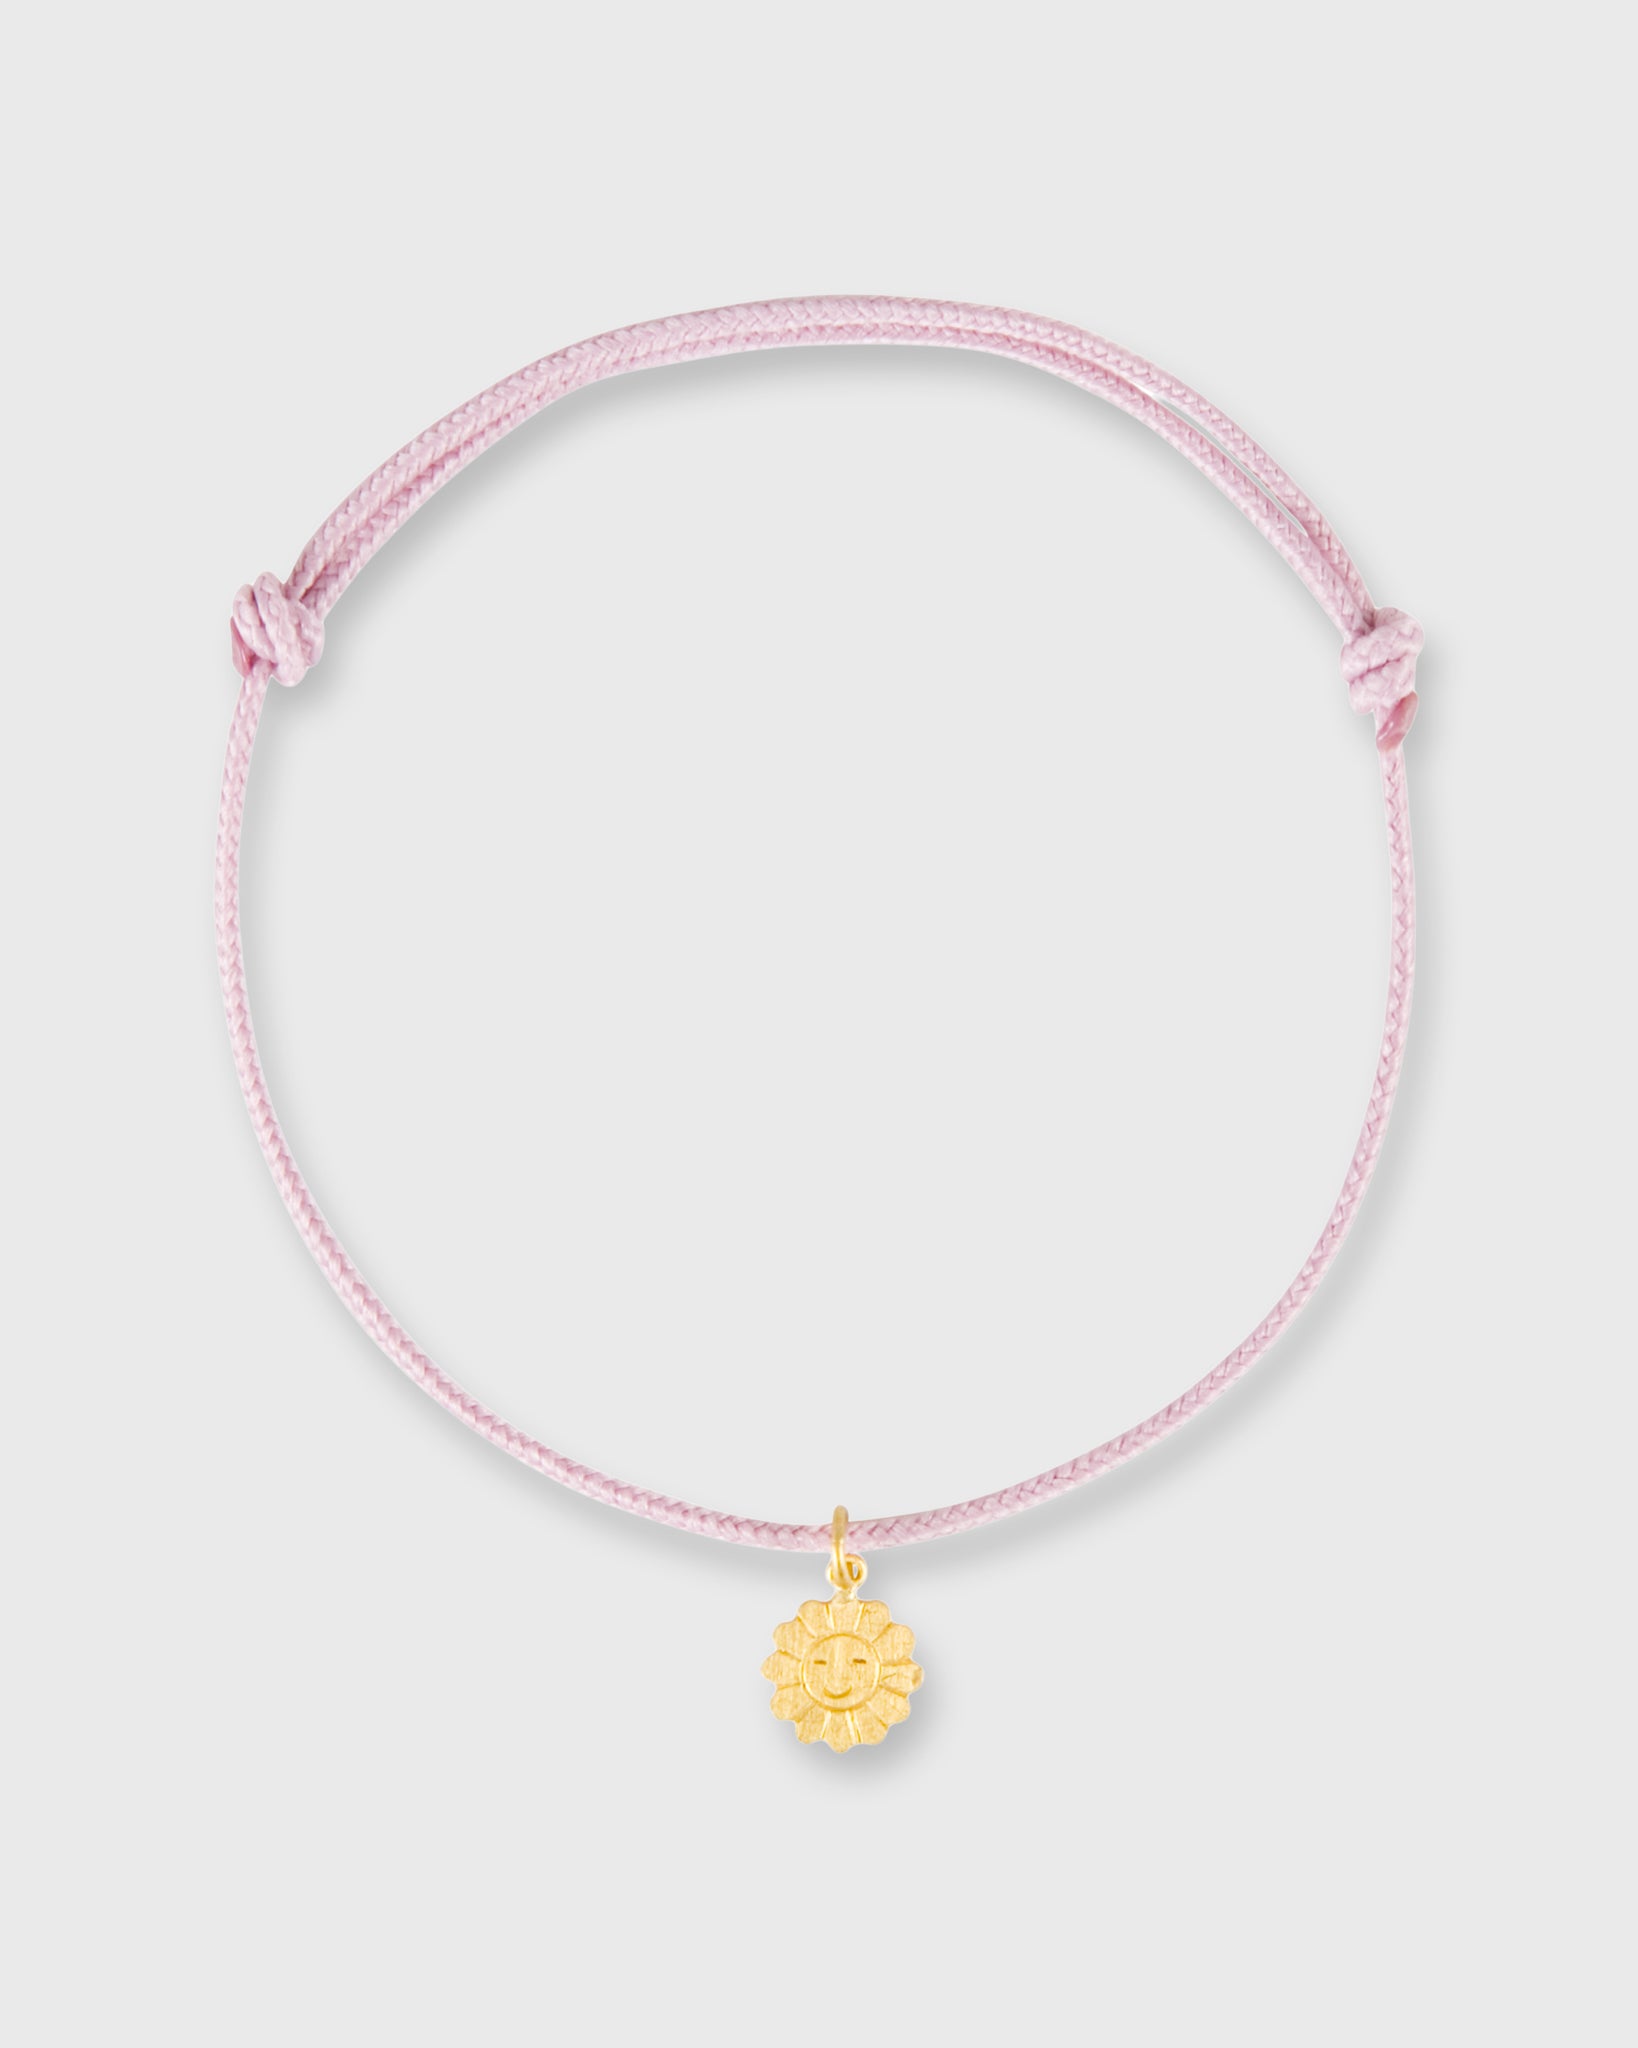 Smiling Daisy Charm Bracelet in Gold/Assorted Color Cord